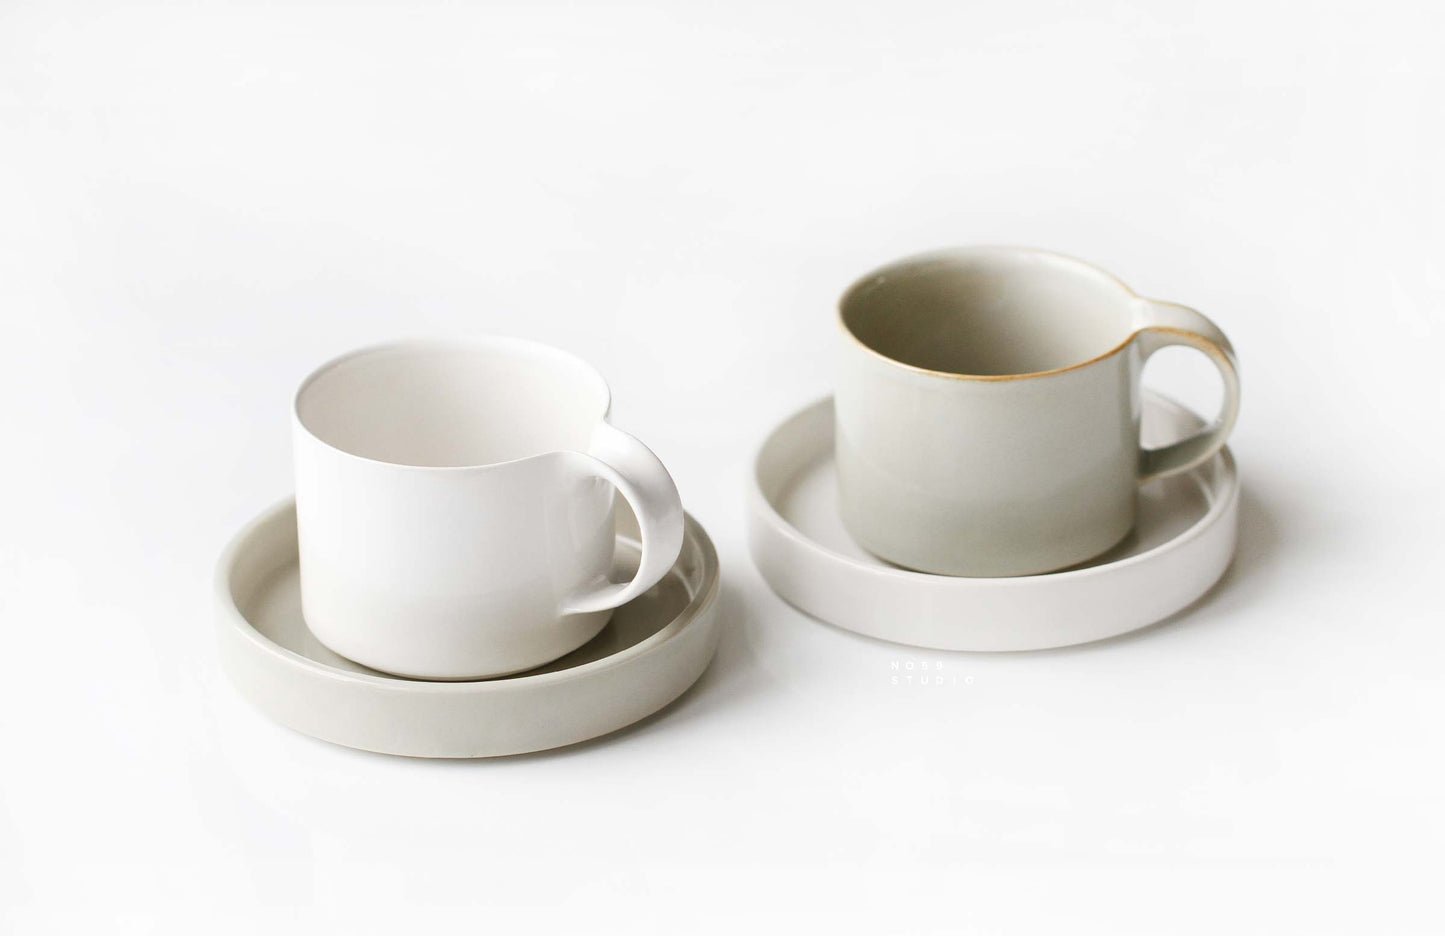 Moderato Cup and Saucer